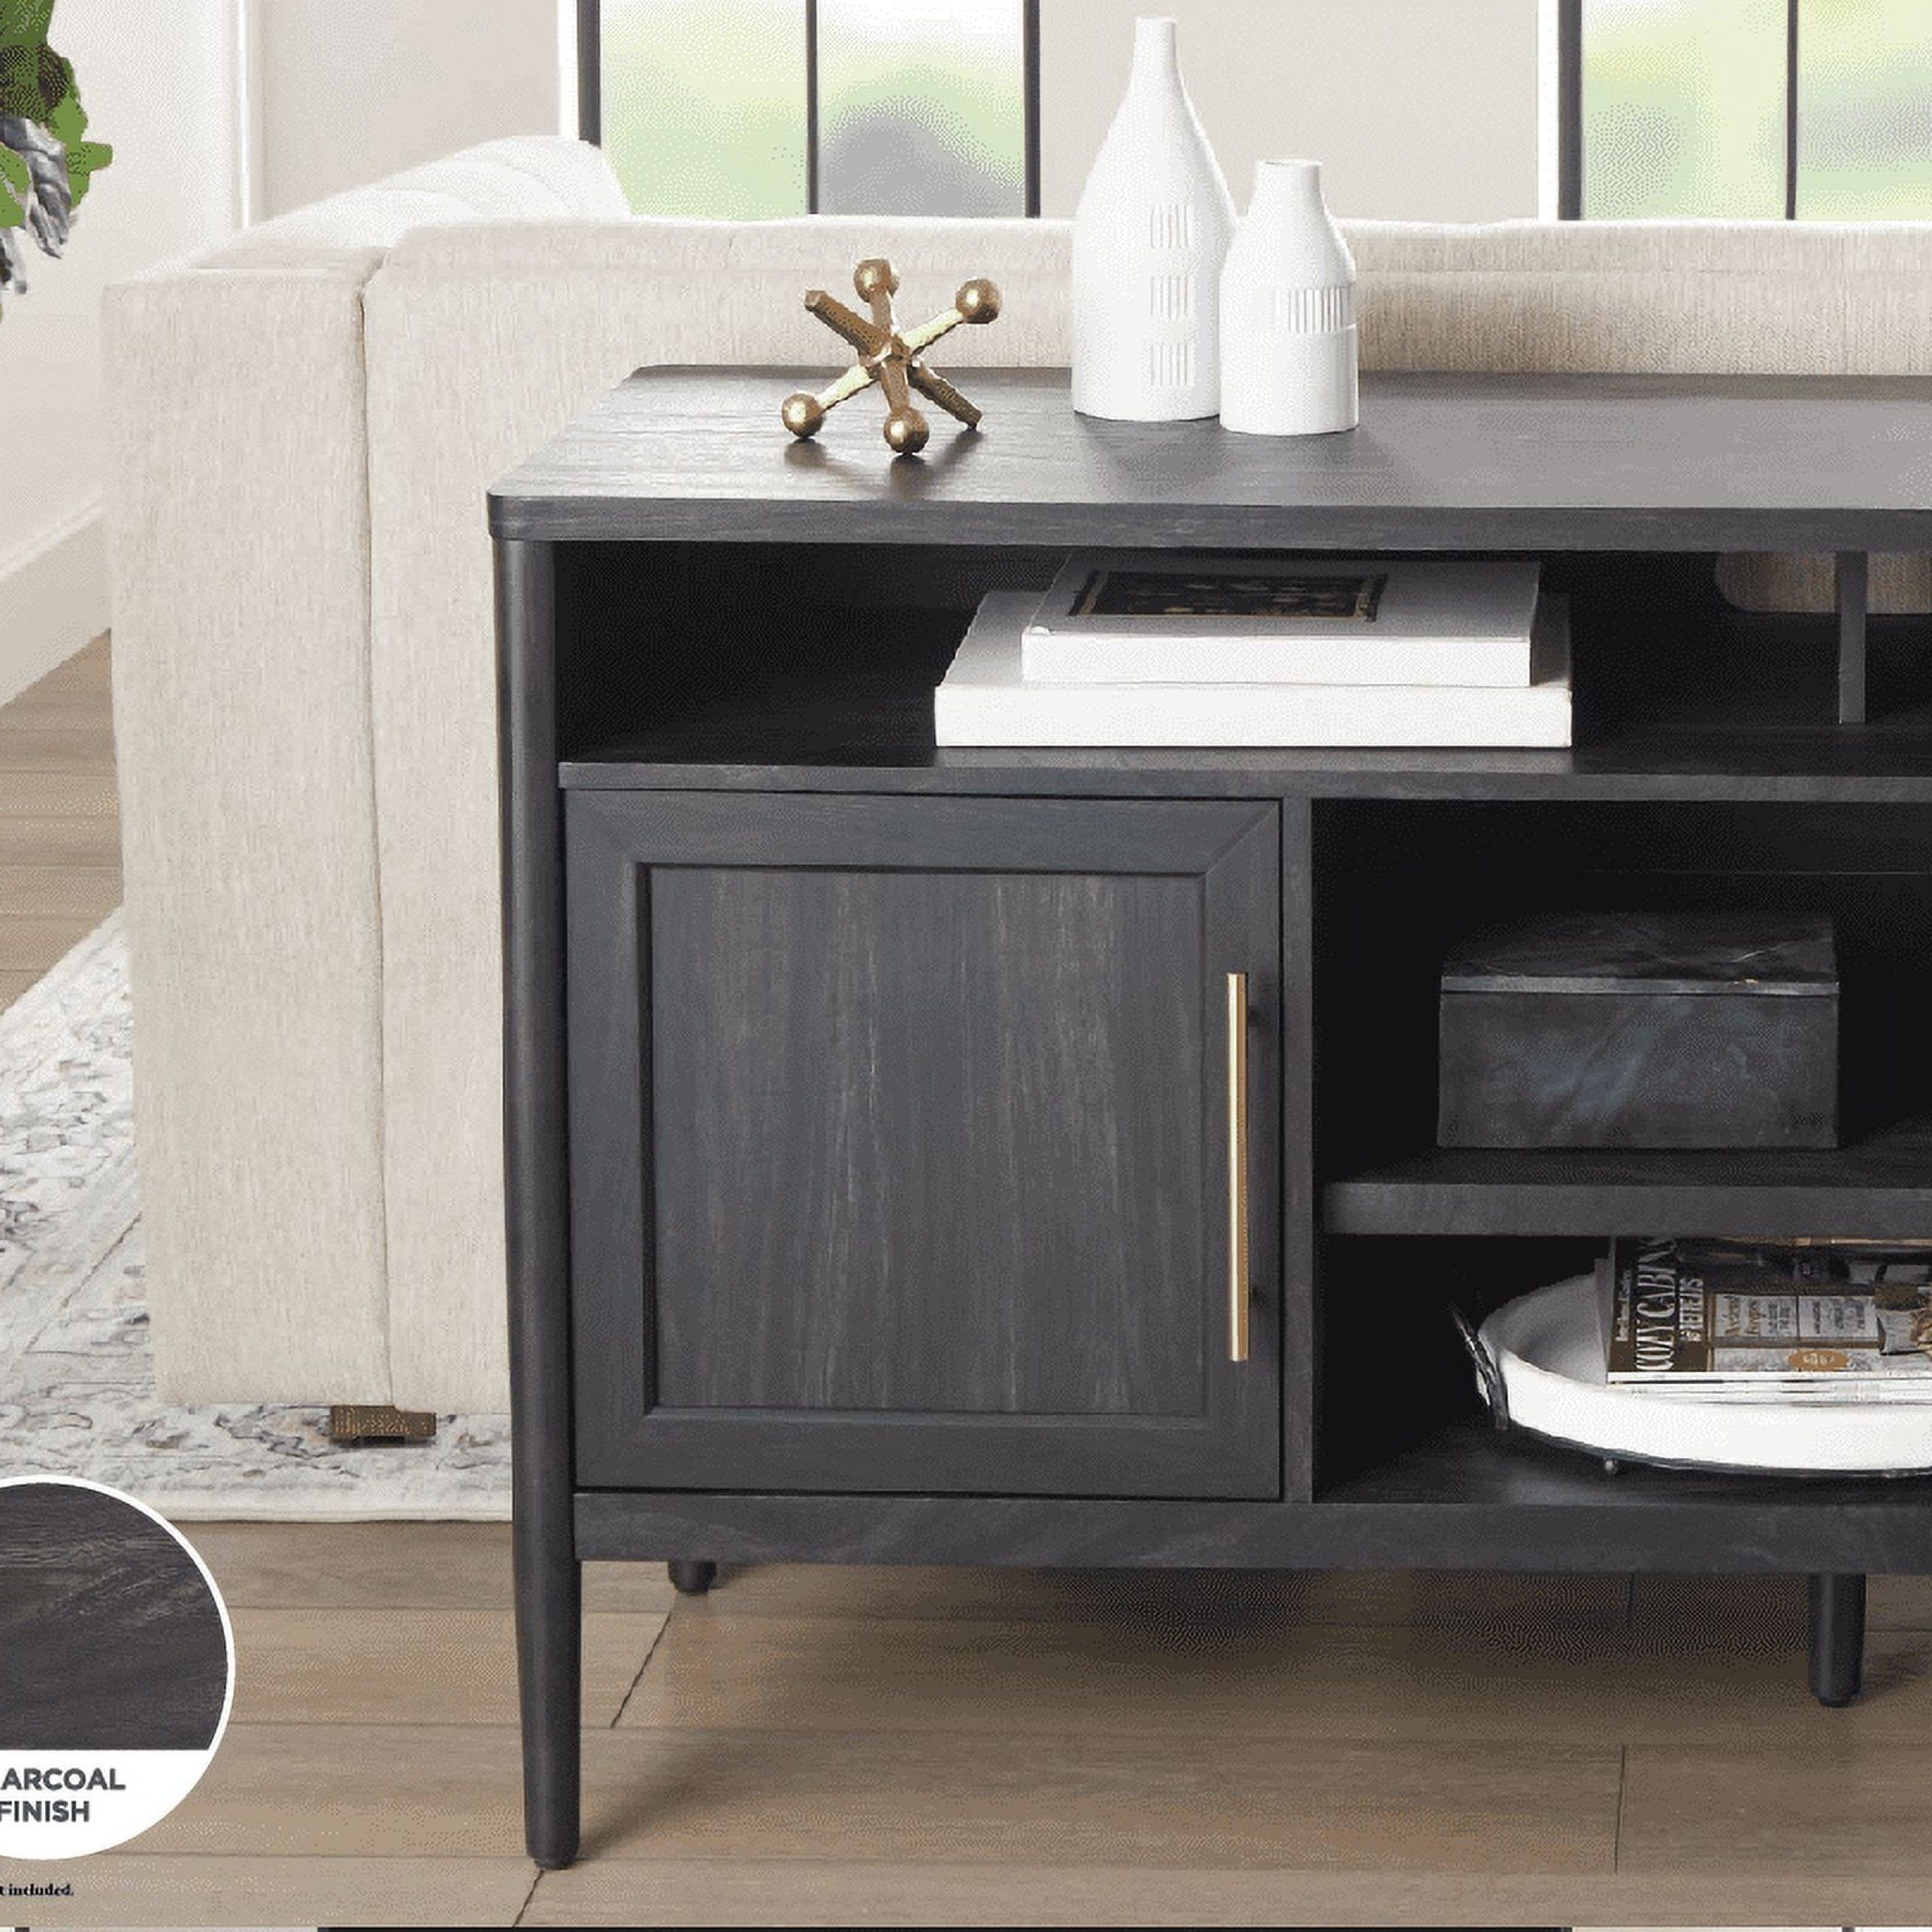 Better Homes & Gardens Oaklee Tv Stand For Tvs Up To 70”, Charcoal With Regard To Oaklee Tv Stands (View 6 of 20)